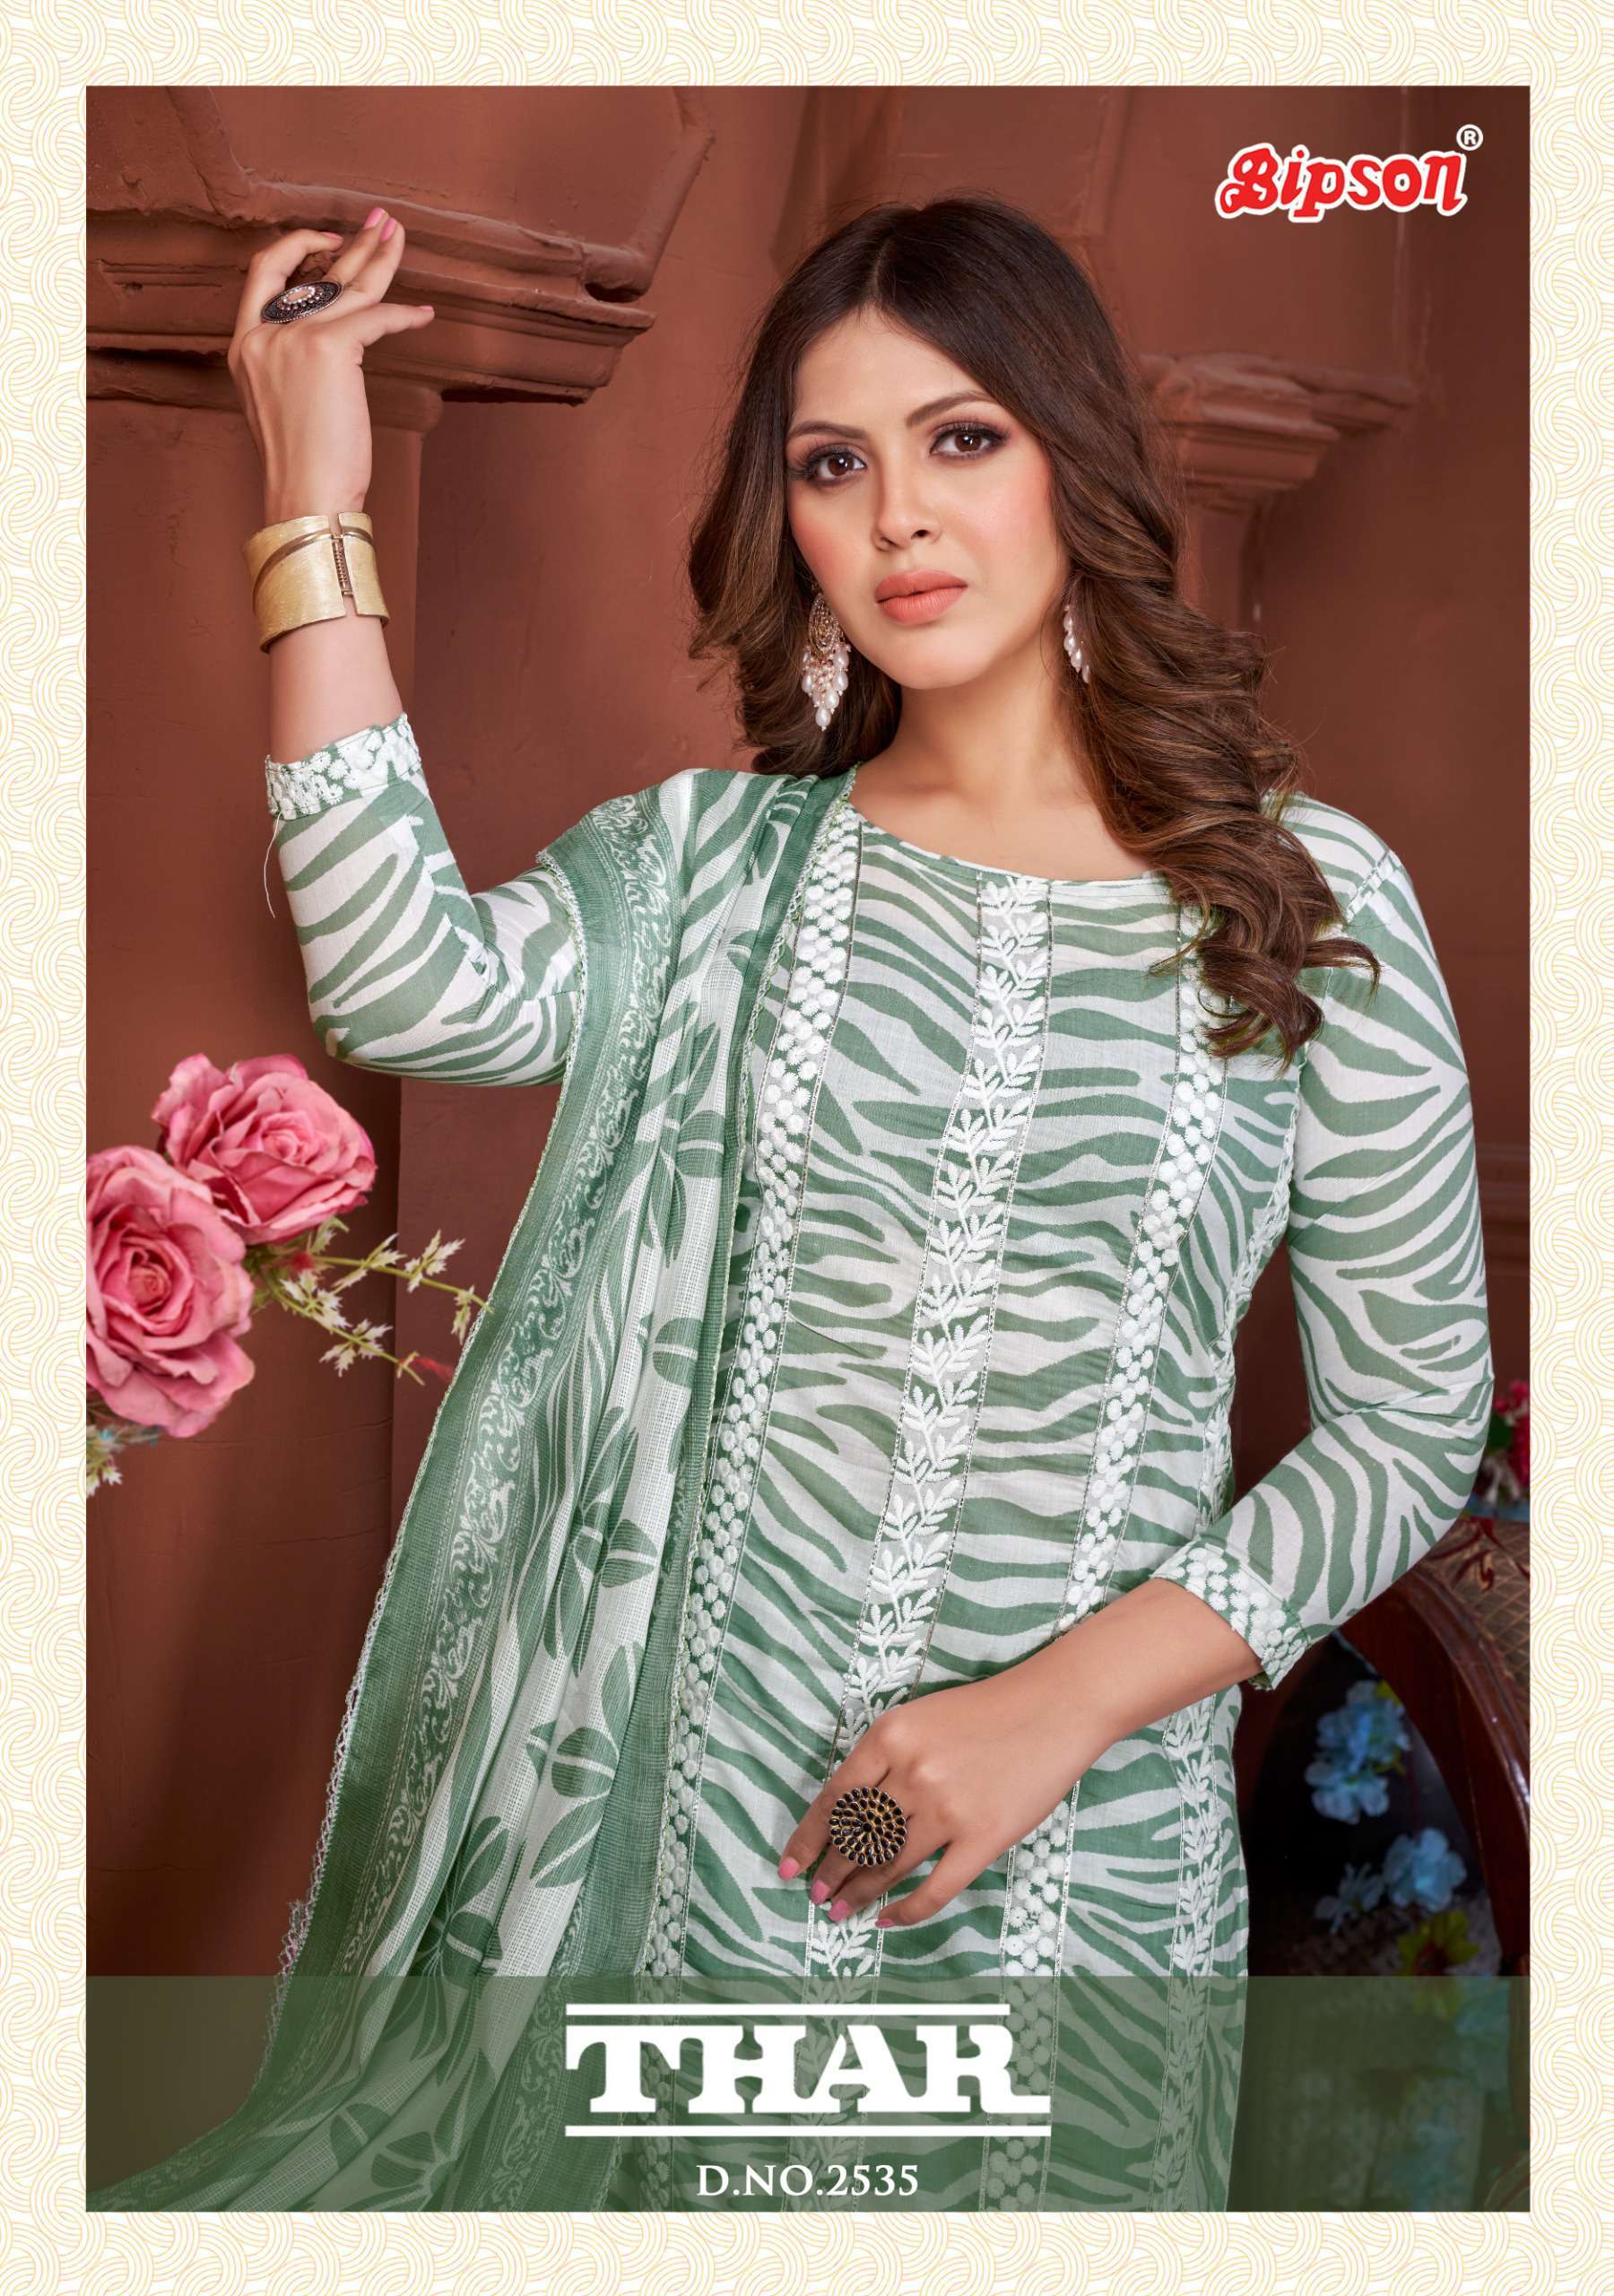 Bipson Thar 2535 Embroidered Designs Cotton Dress Catalog Wholesalers